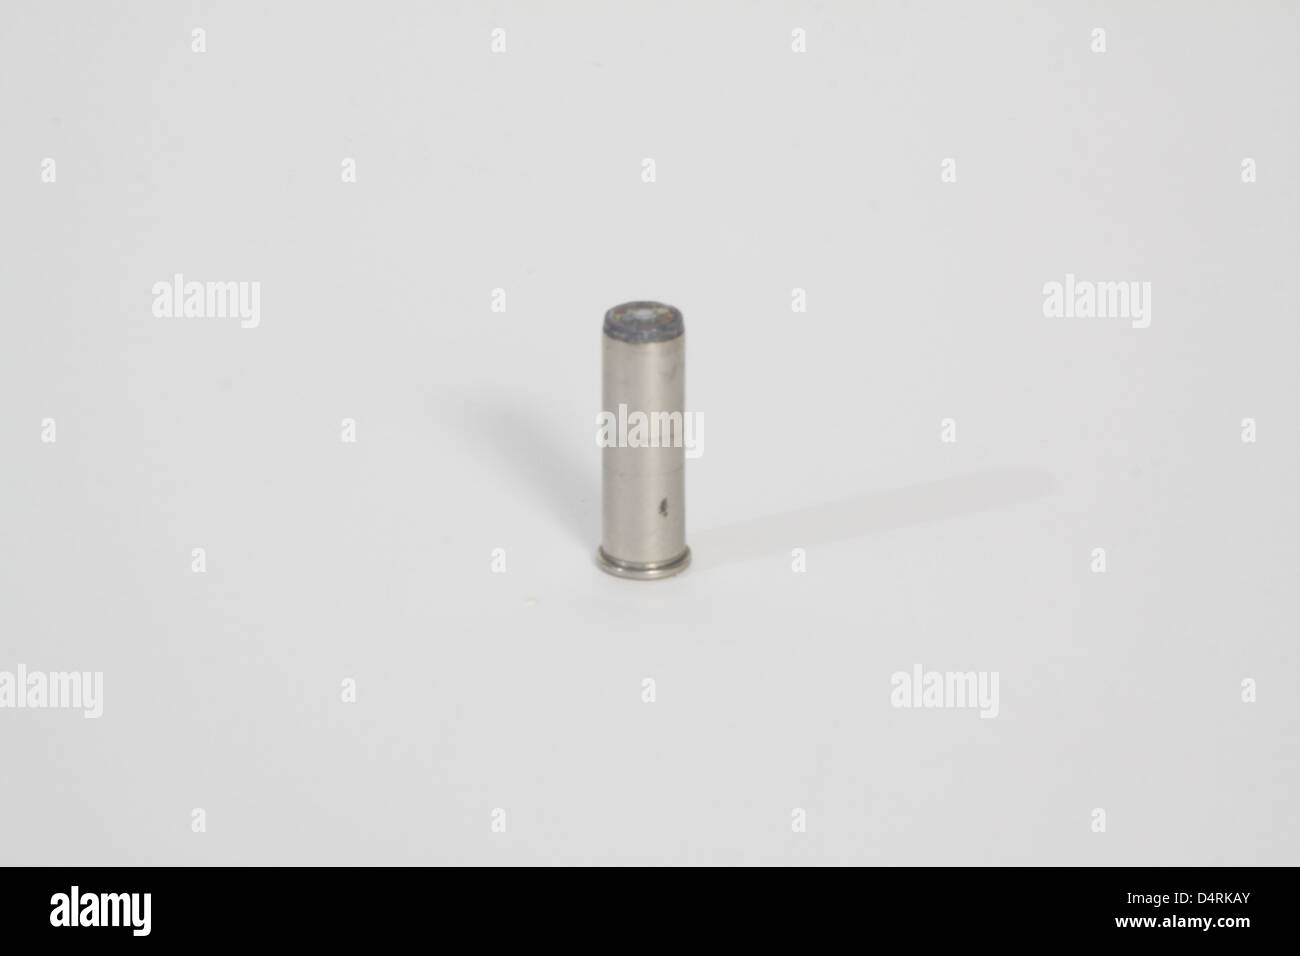 Wad-Cutter, a flat topped bullet used for target practice on paper targets Stock Photo